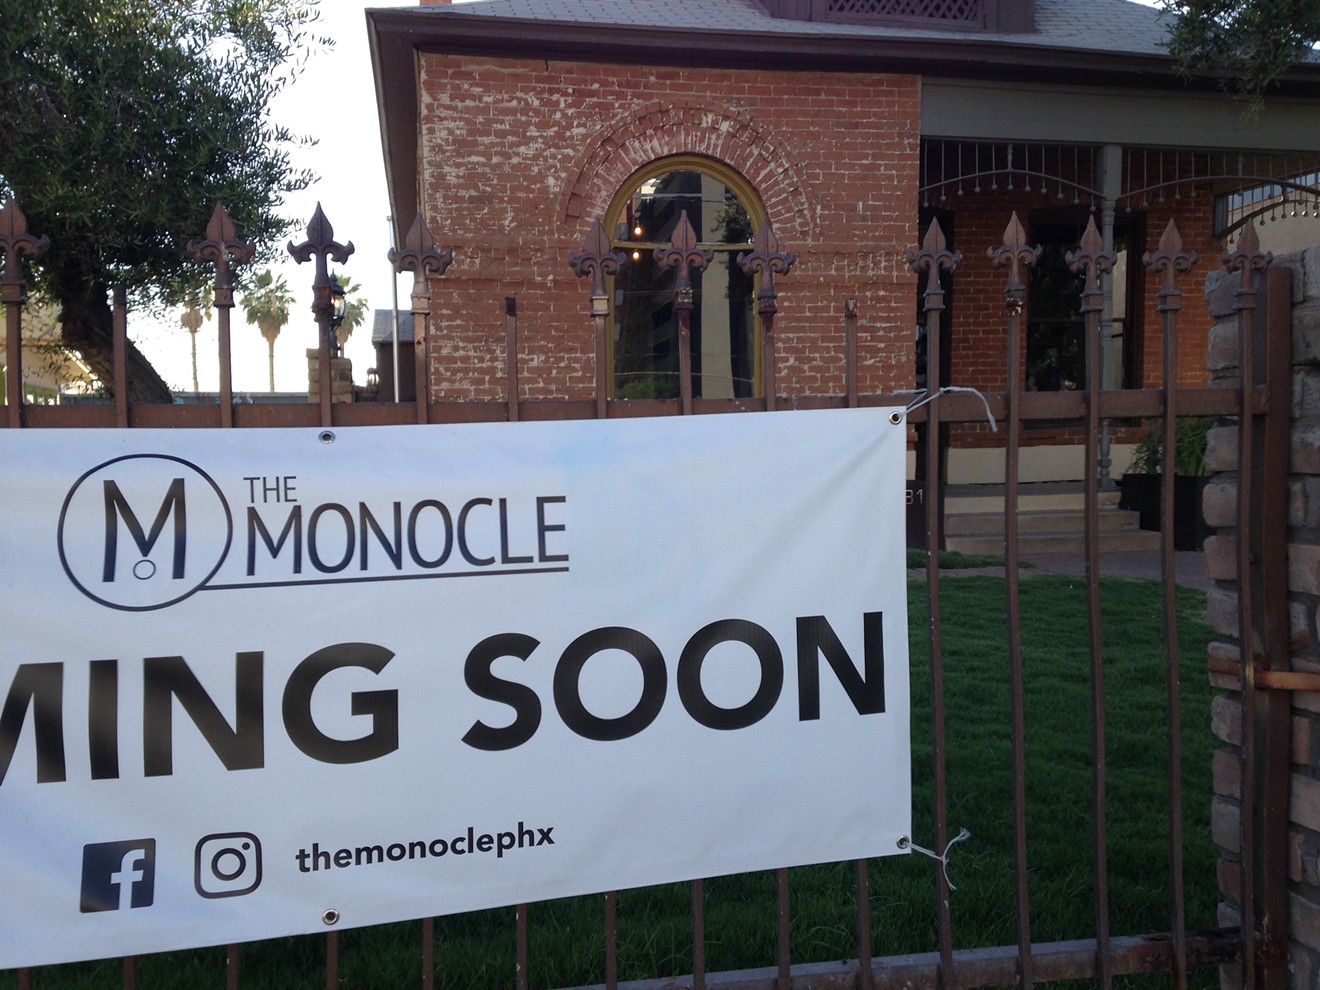 The Monocle, at 816 North Third Street in downtown Phoenix, never opened after it was revealed a co-owner had a felony conviction. It recently reopened under new management as the Farish House.